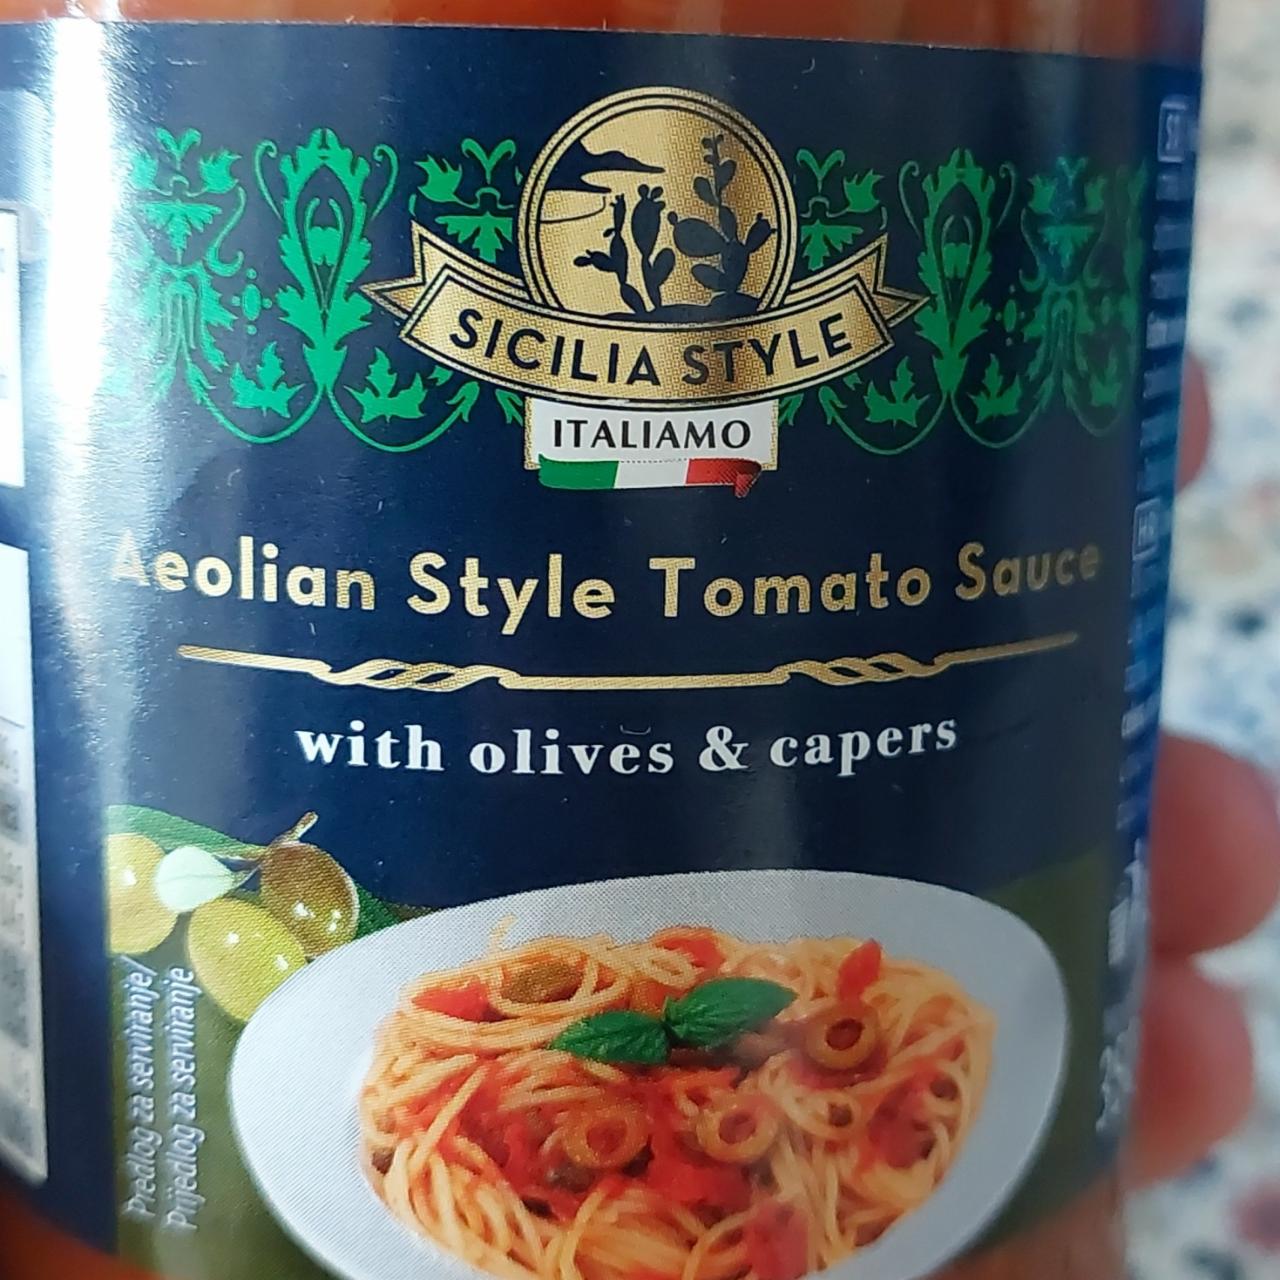 Fotografie - Aeolian Style Tomato Sauce with olives & capers Italiamo